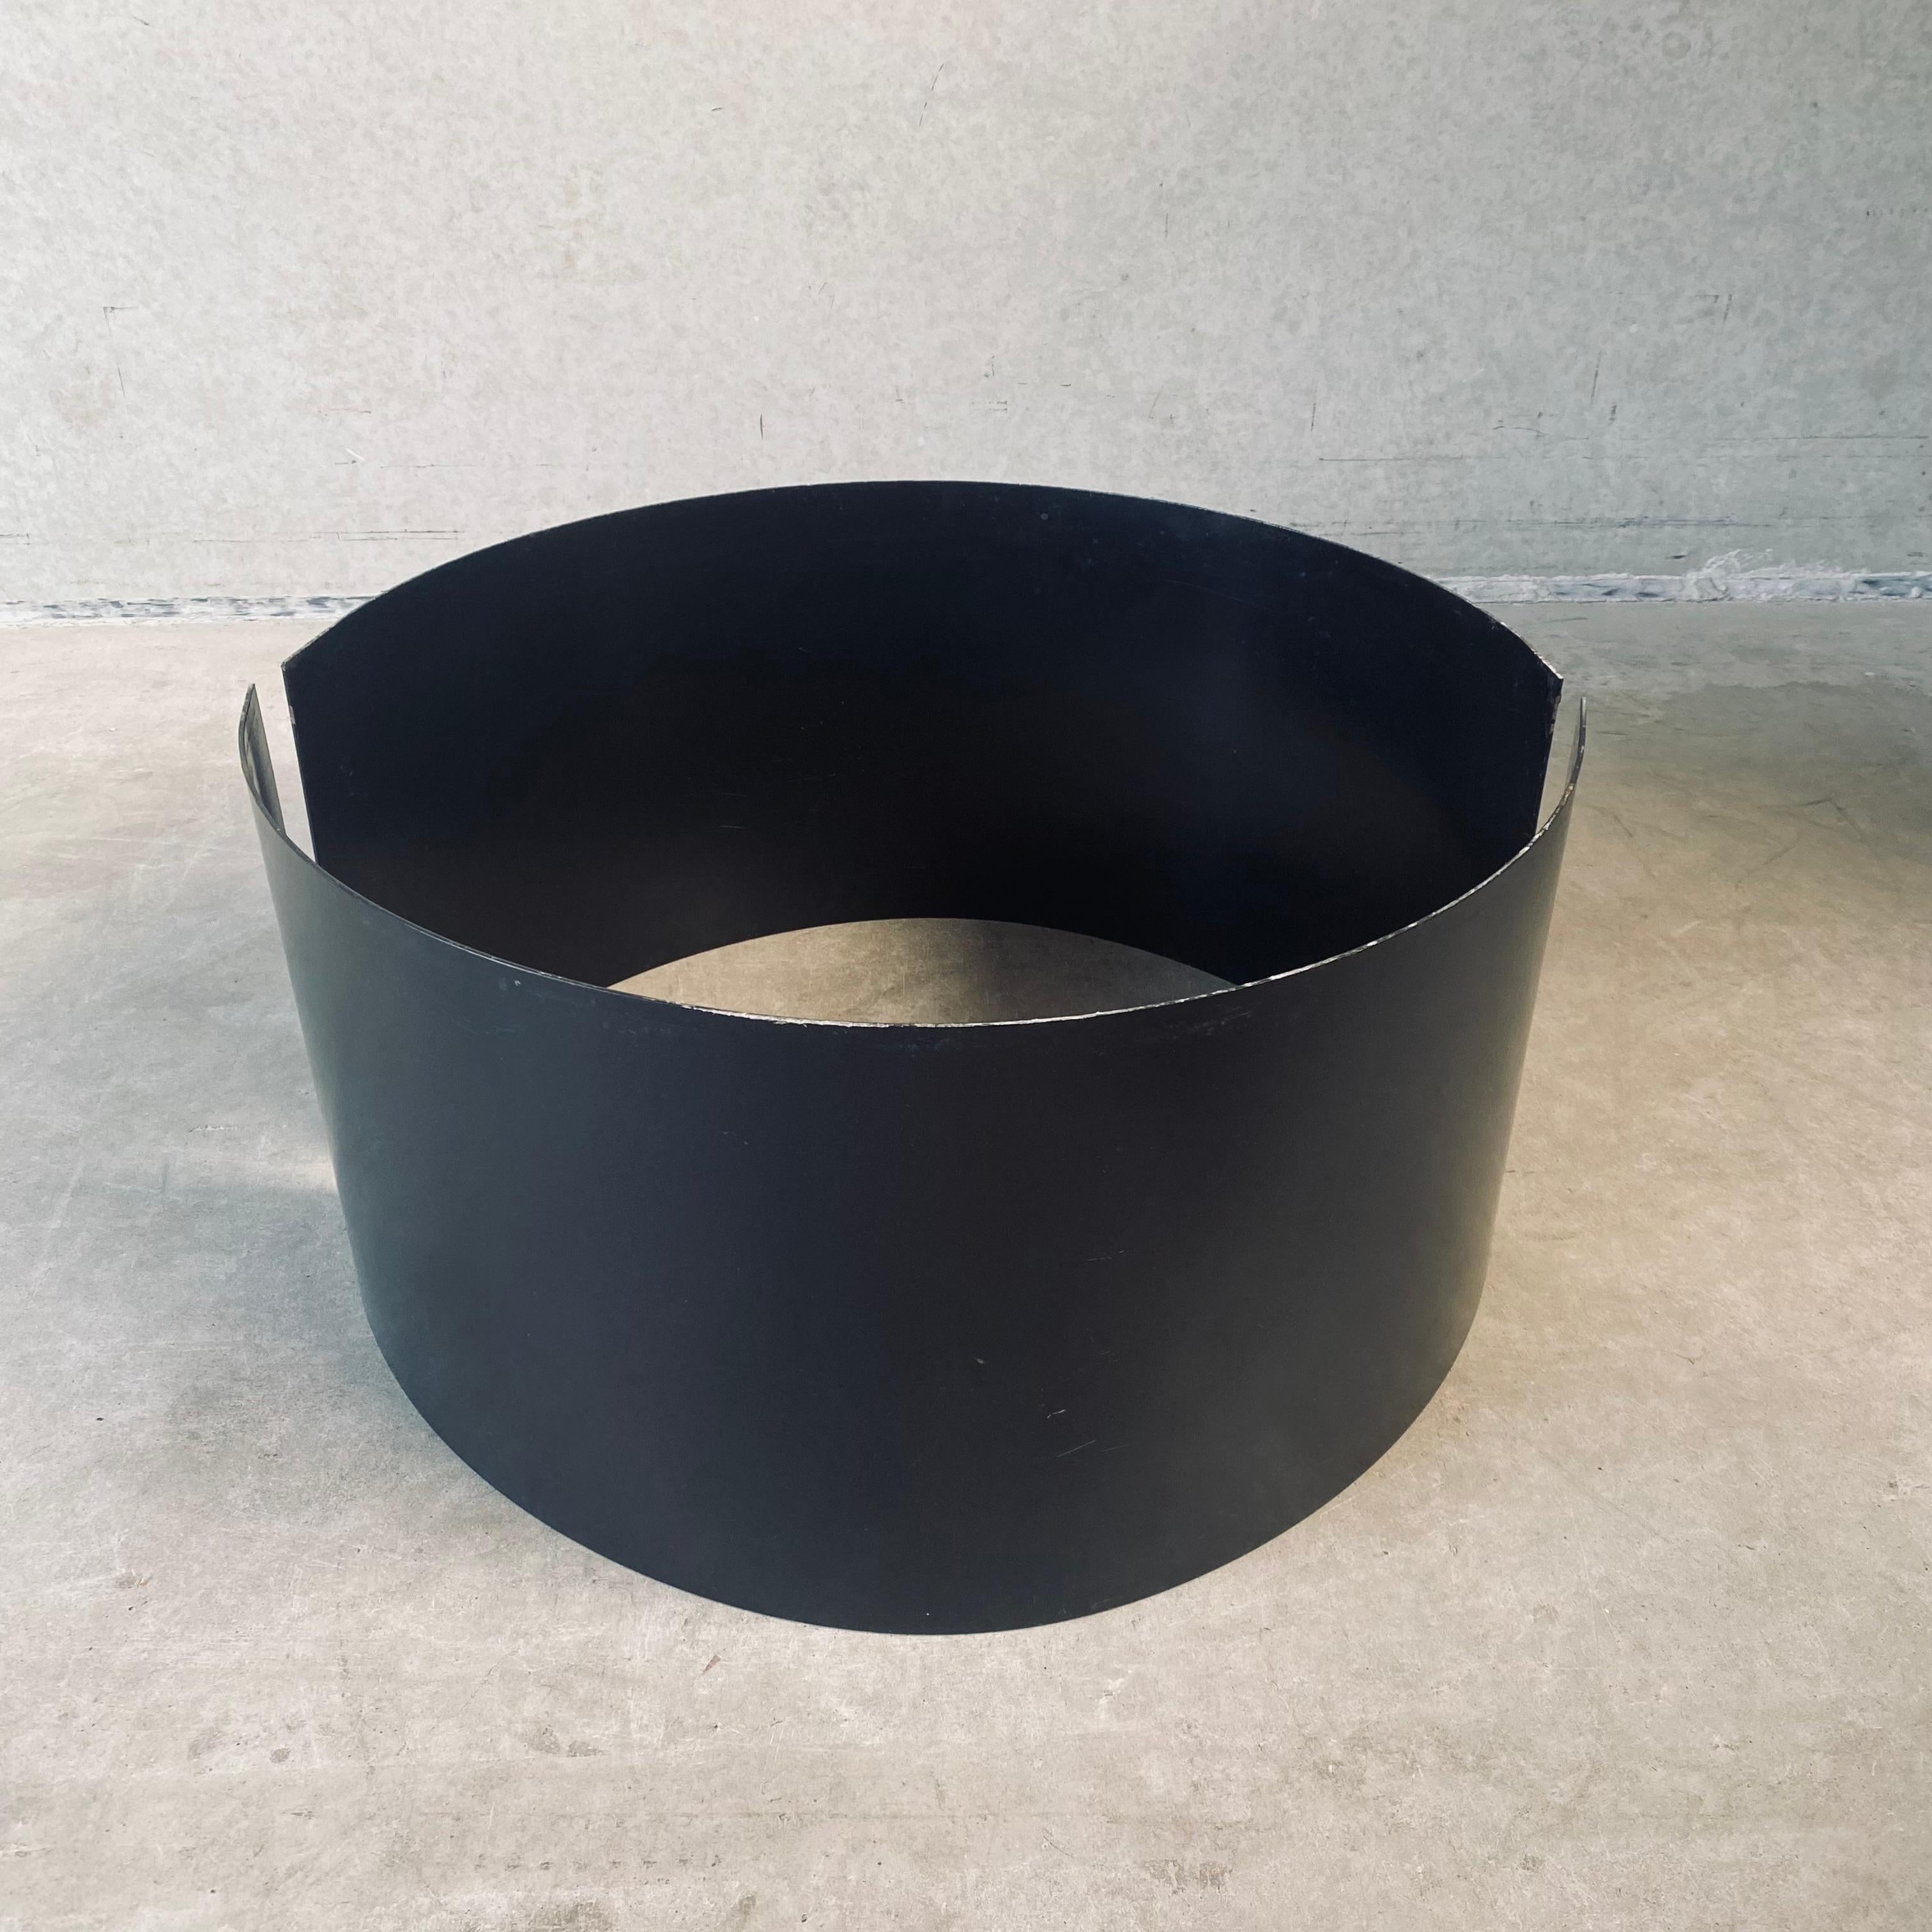 Brutalist Art Stone Round Coffee Table by Sculptor Paul Kingma Netherlands, 1985 For Sale 12